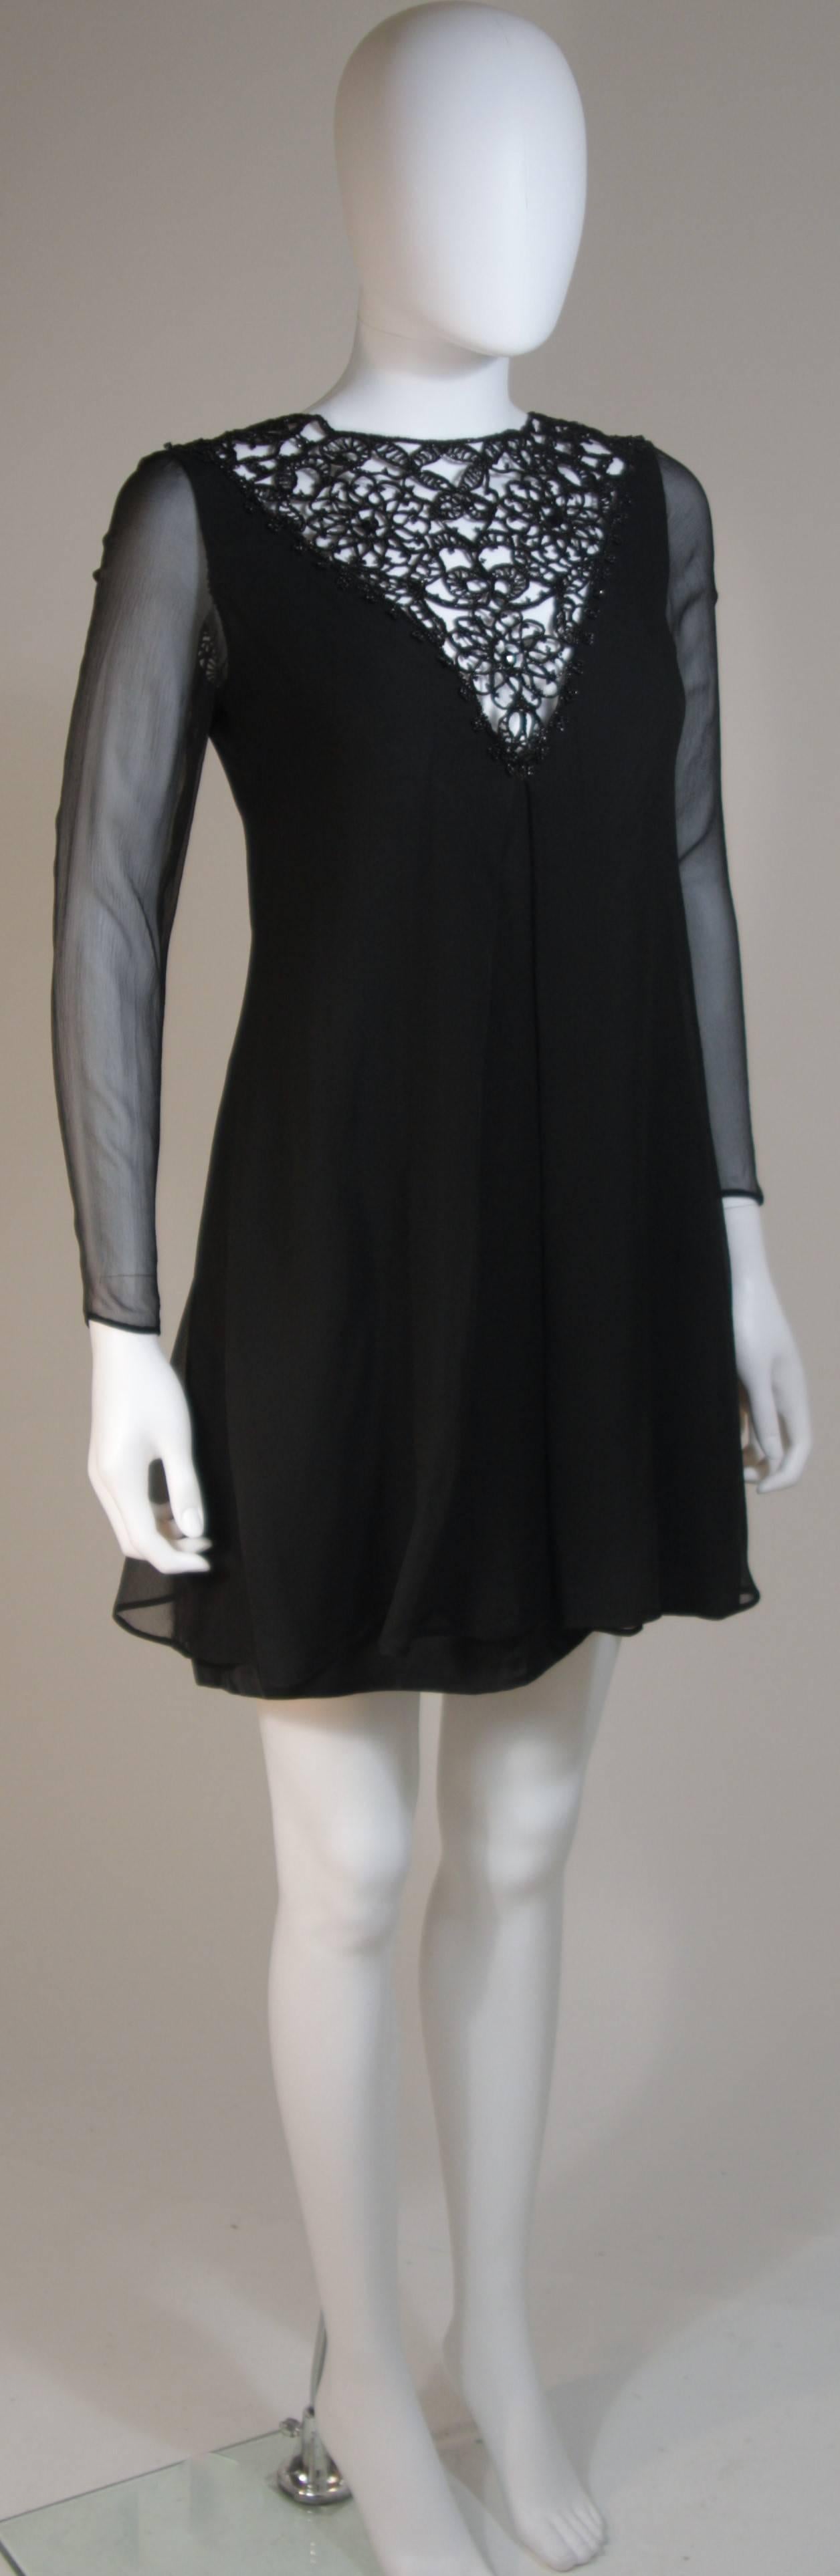 Cutstom Made 1960s Silk Chiffon Cocktail Dress with Beaded Neckline Size 2-4 In Excellent Condition For Sale In Los Angeles, CA